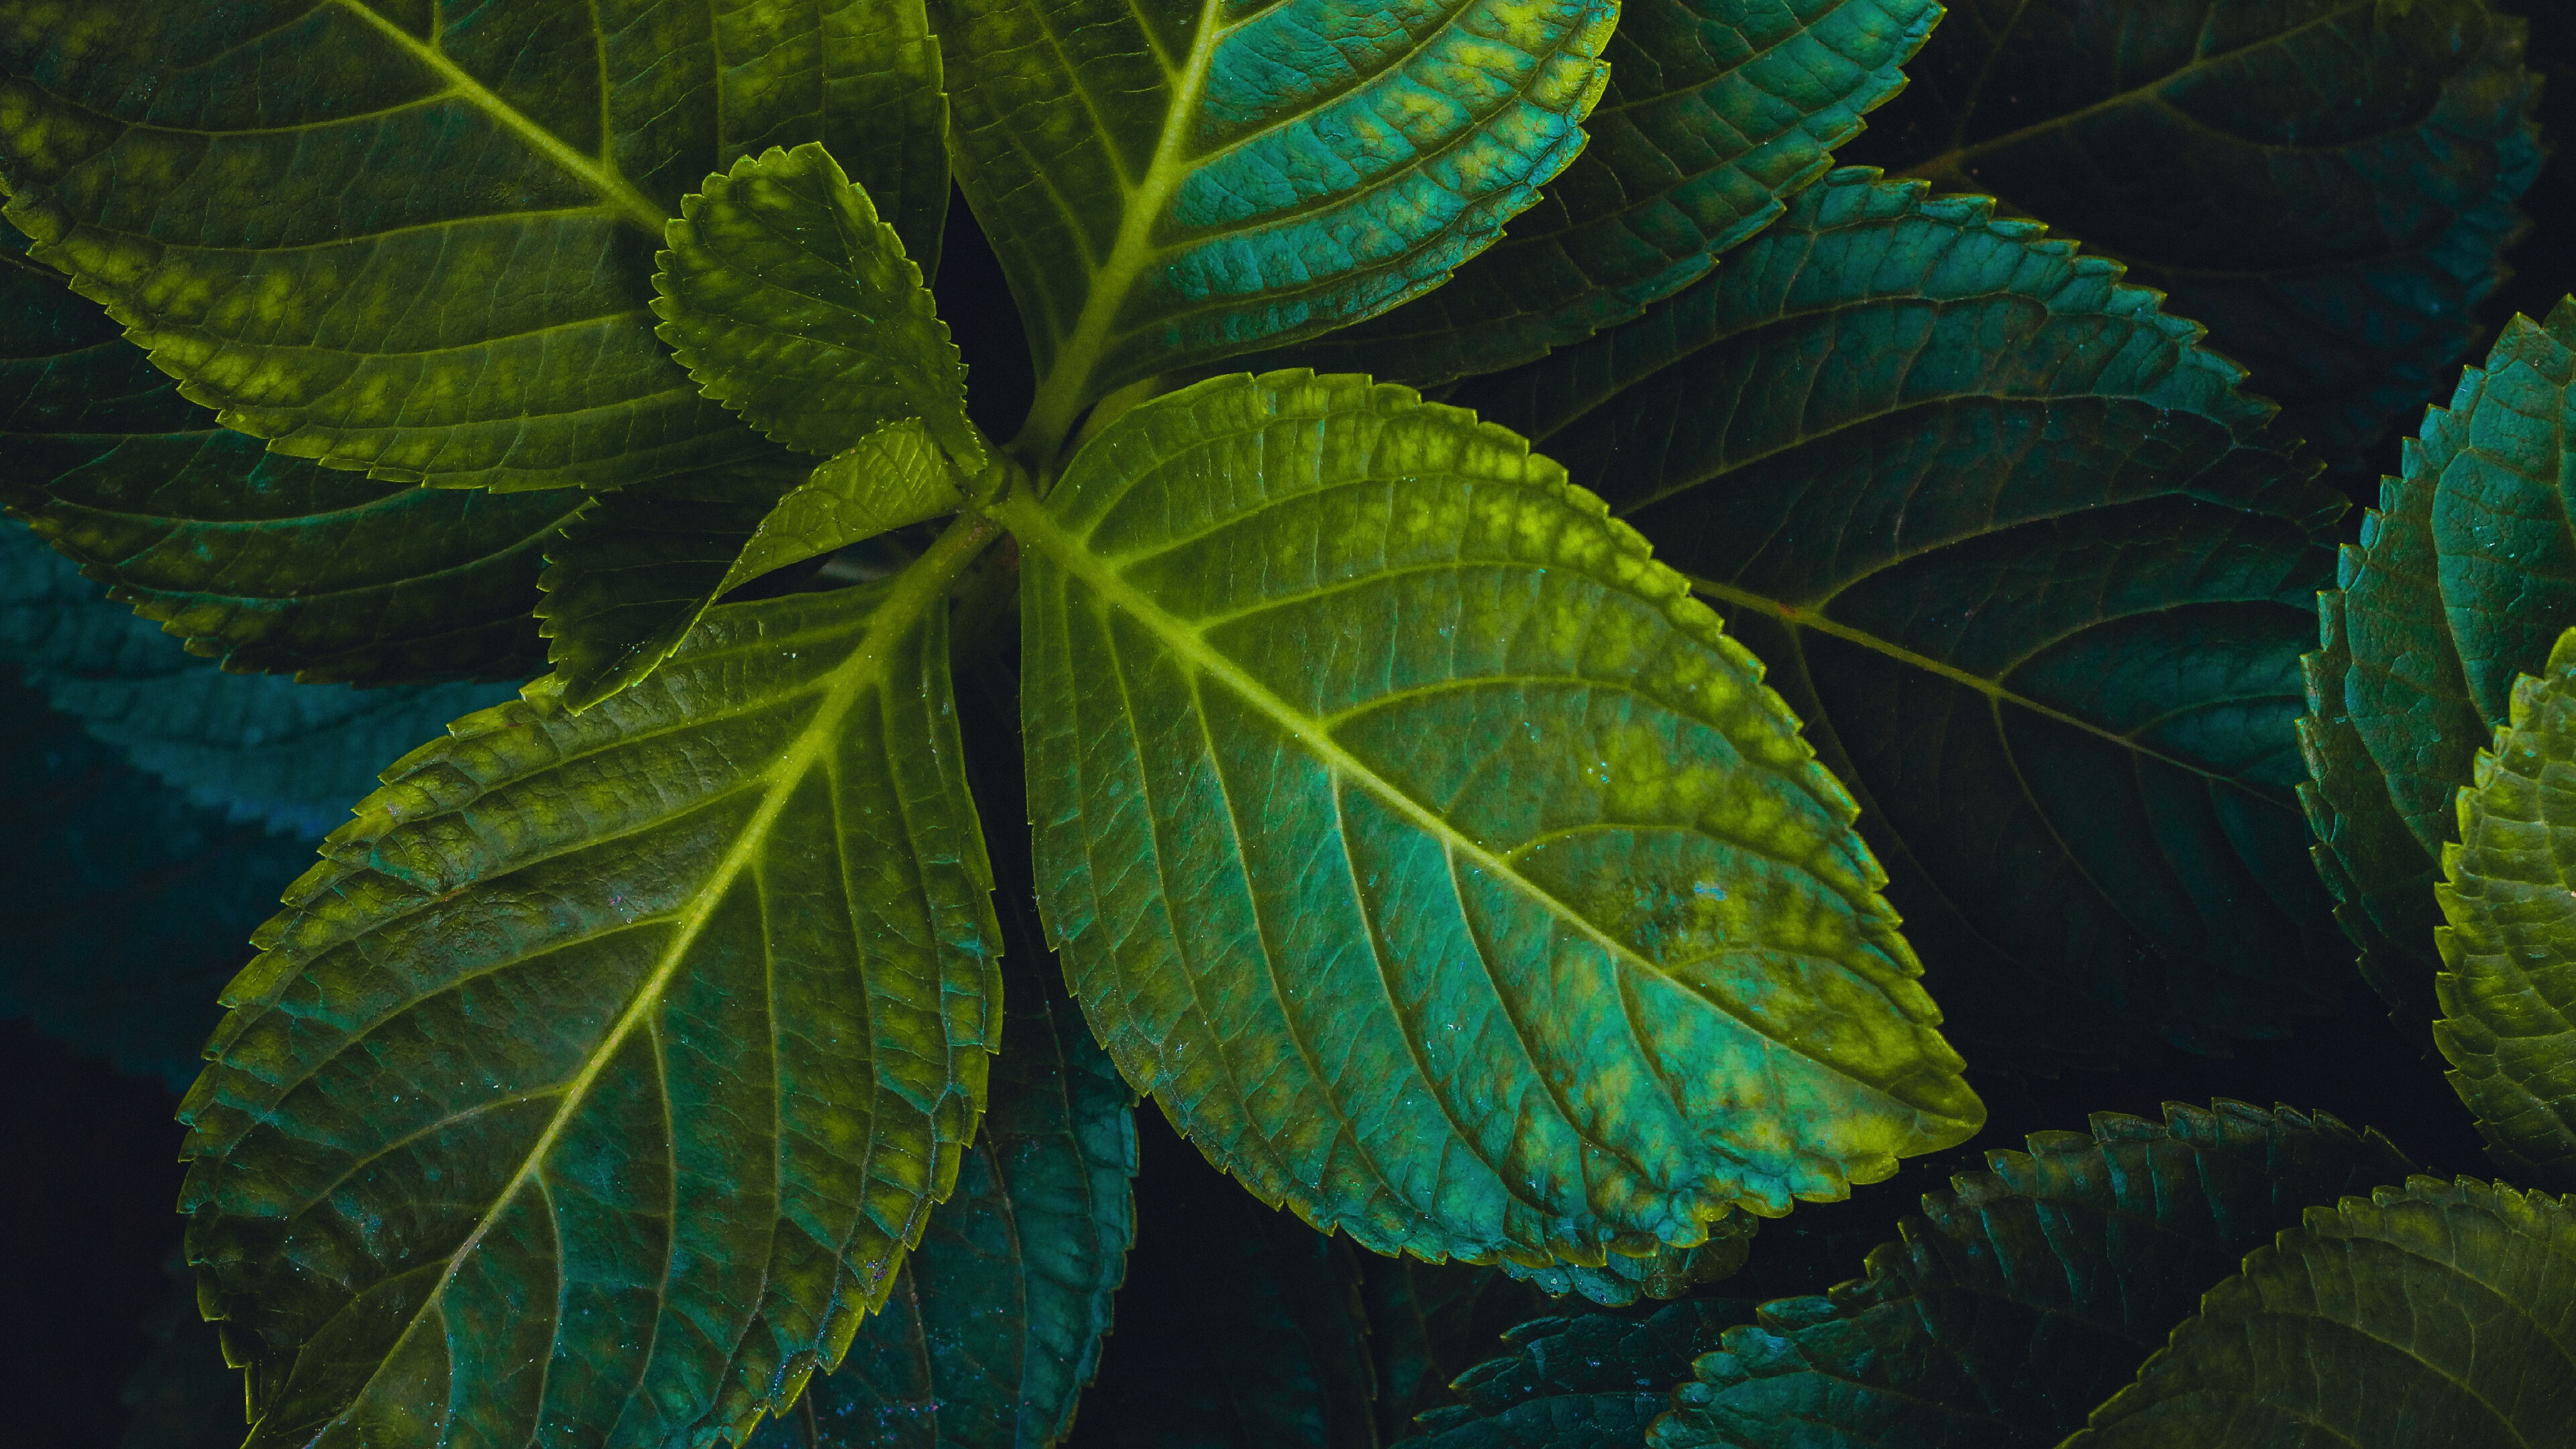 Leaves: Lamina, Photosynthesis, Food manufacturing process in green plants. 3840x2160 4K Wallpaper.